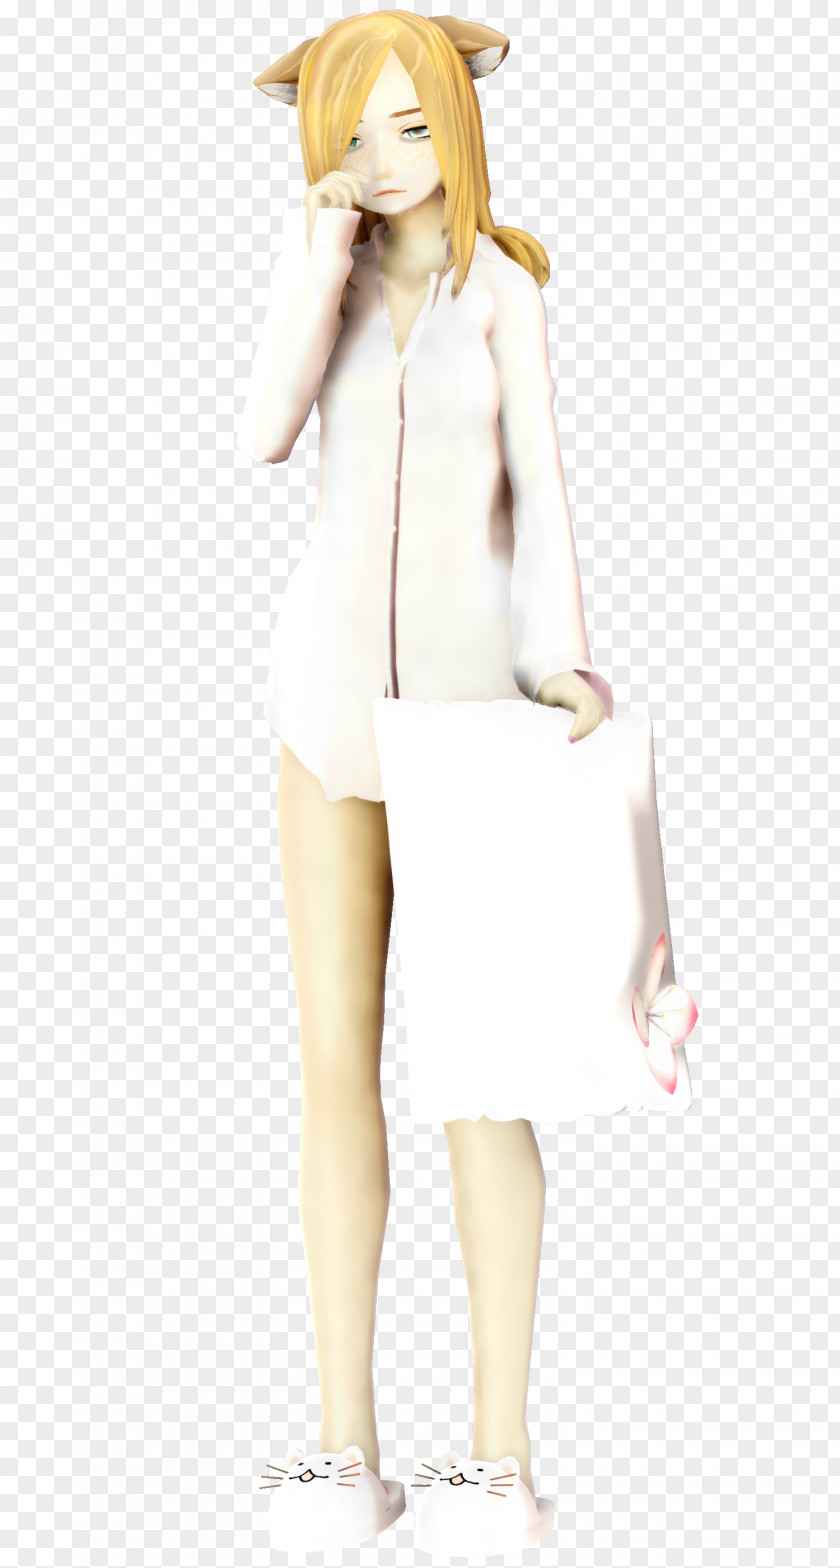 Mmd Pillow Costume Shoulder Character Fiction PNG